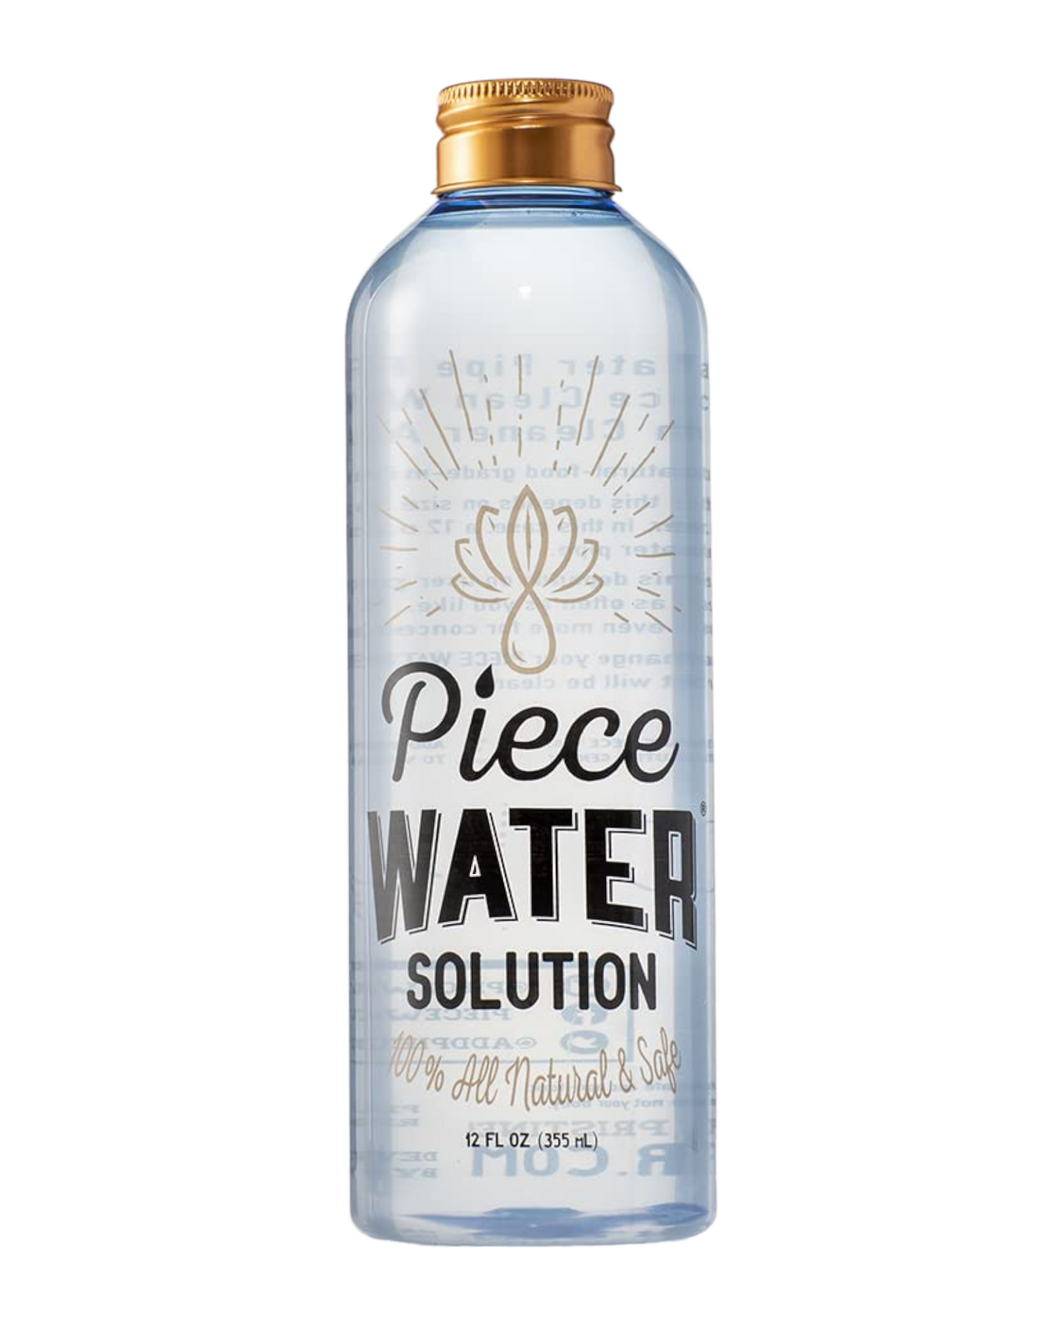 12 oz bottle of Piece Water Solution